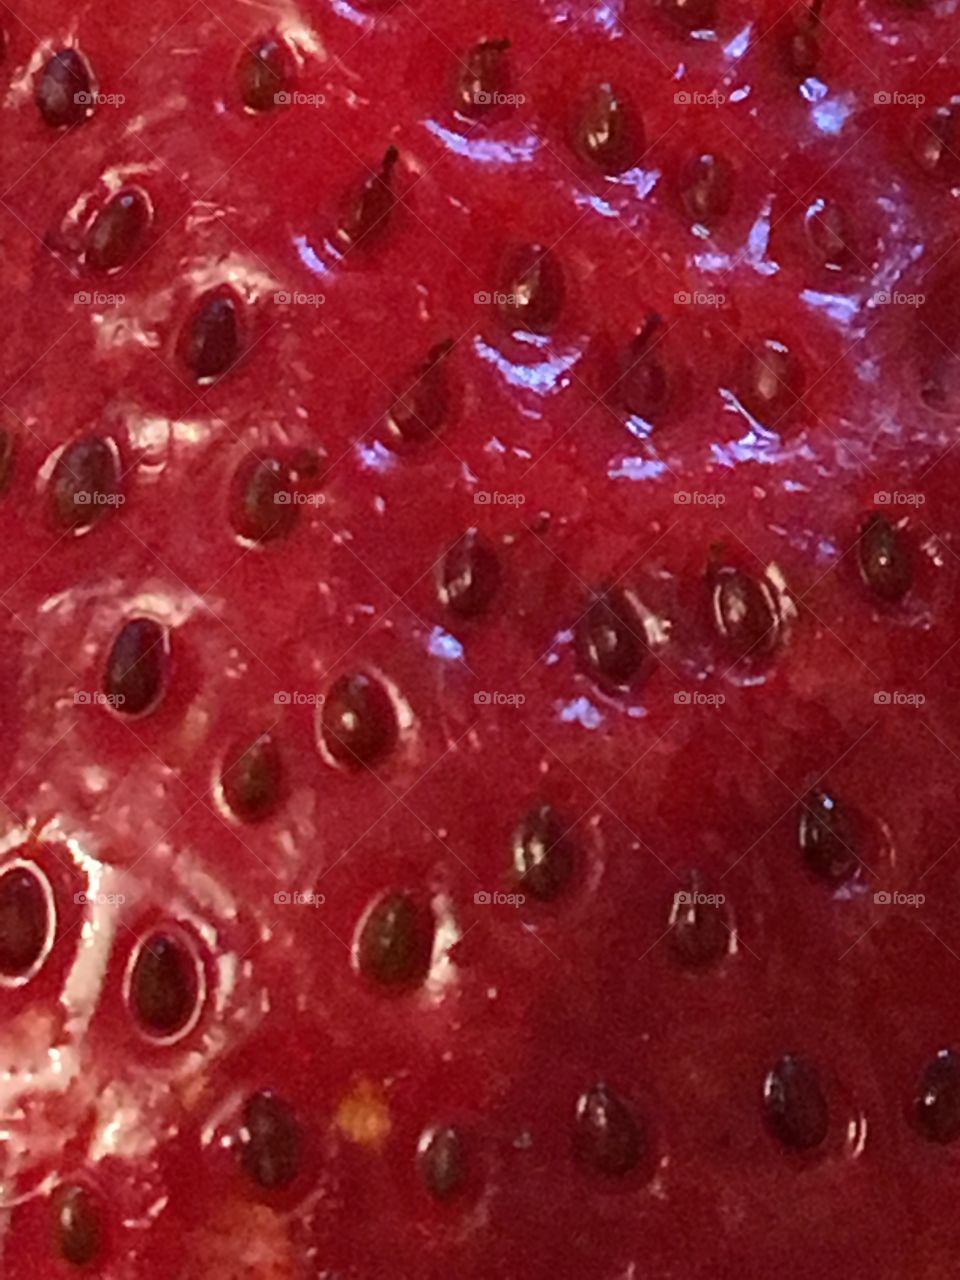 Strawberry closeup with seeds